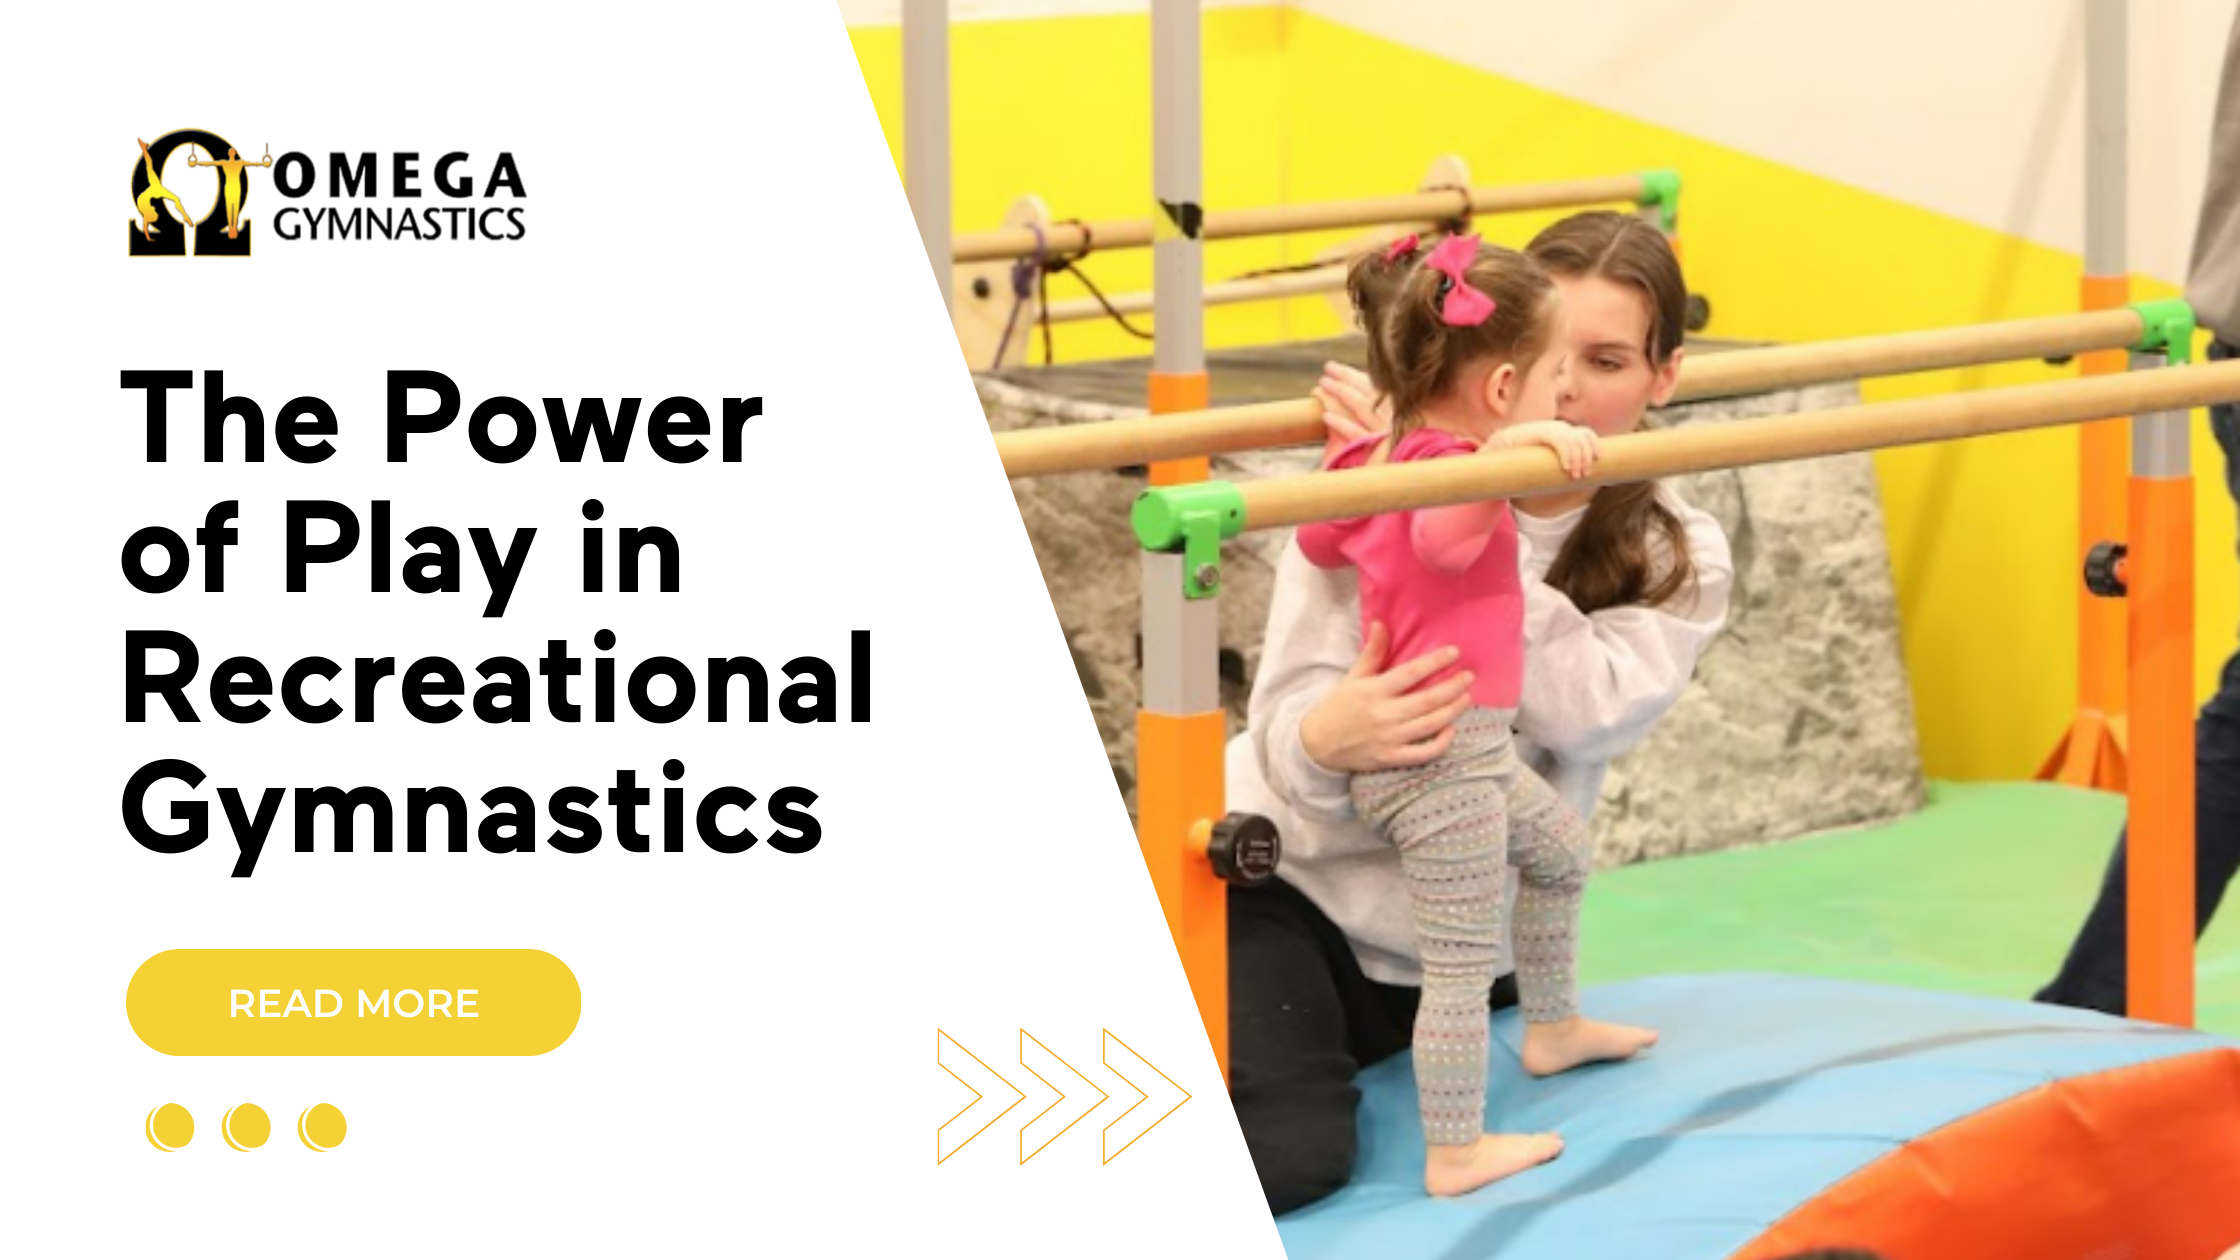 The Power of Play in Recreational Gymnastics